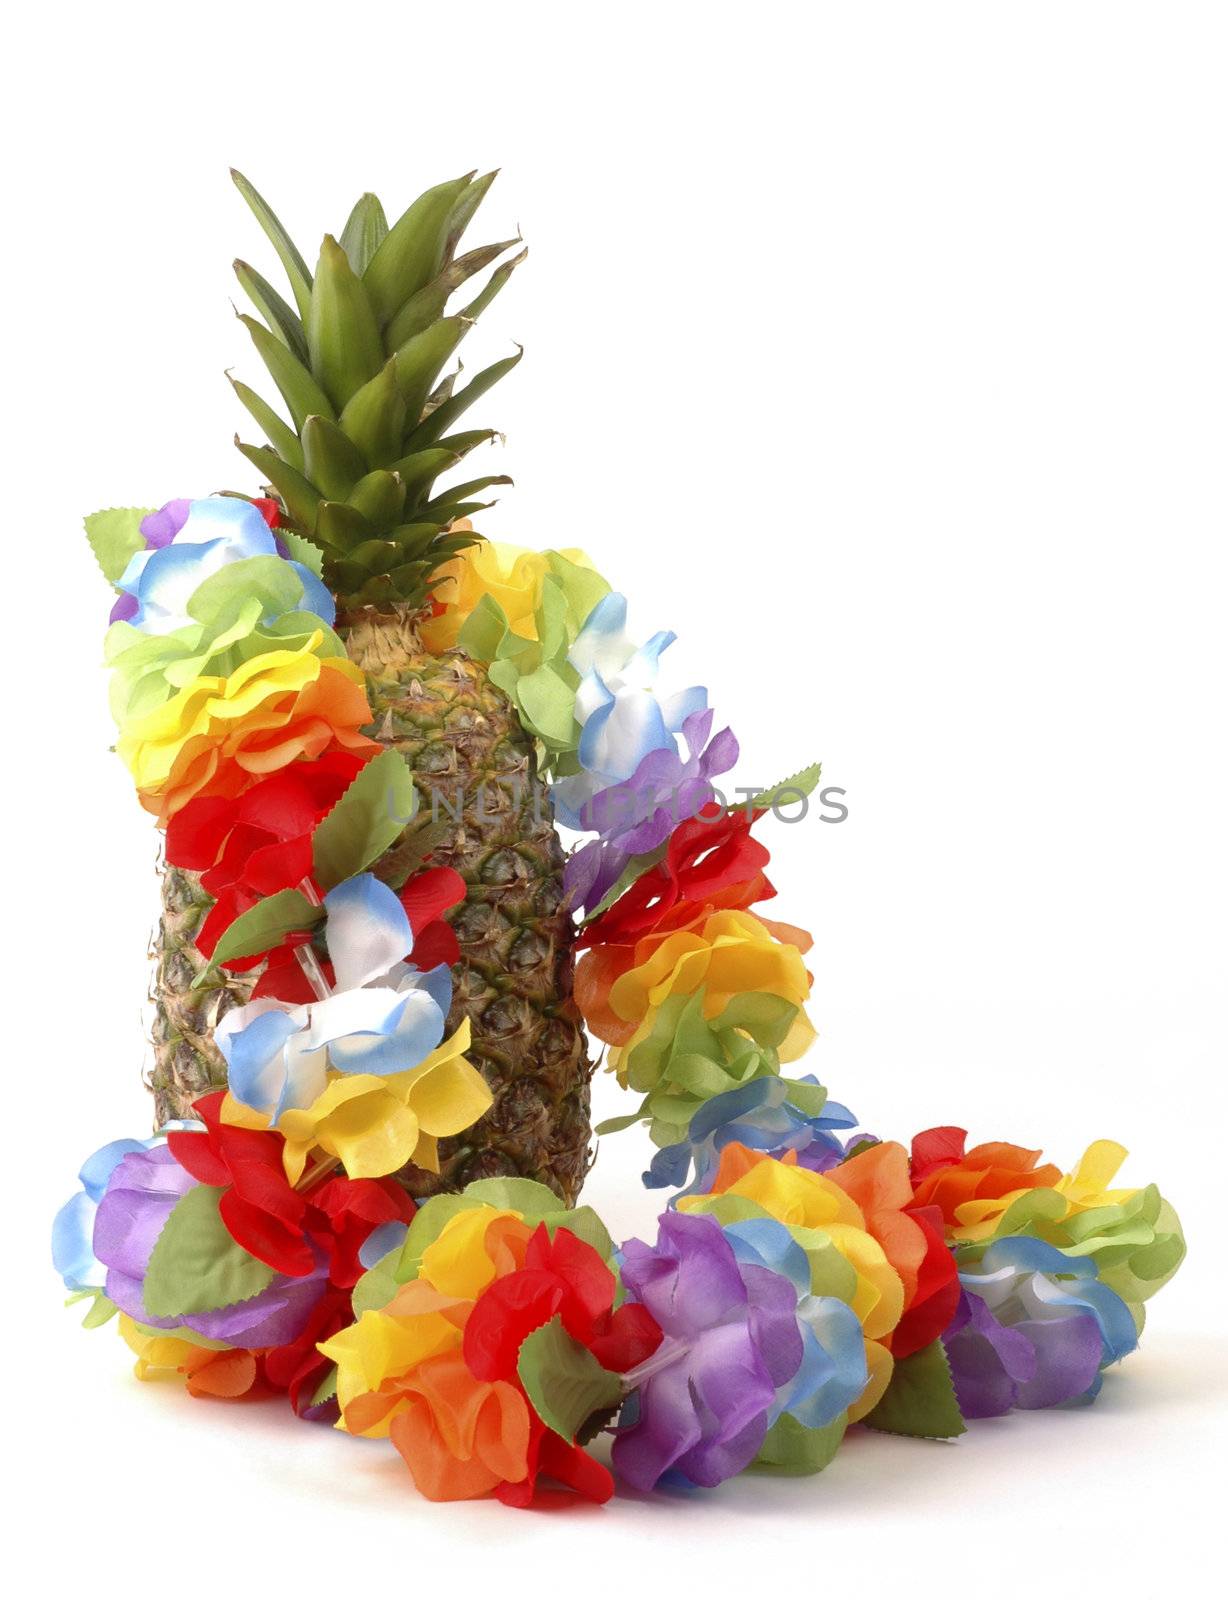 Pineapple and Lei by billberryphotography